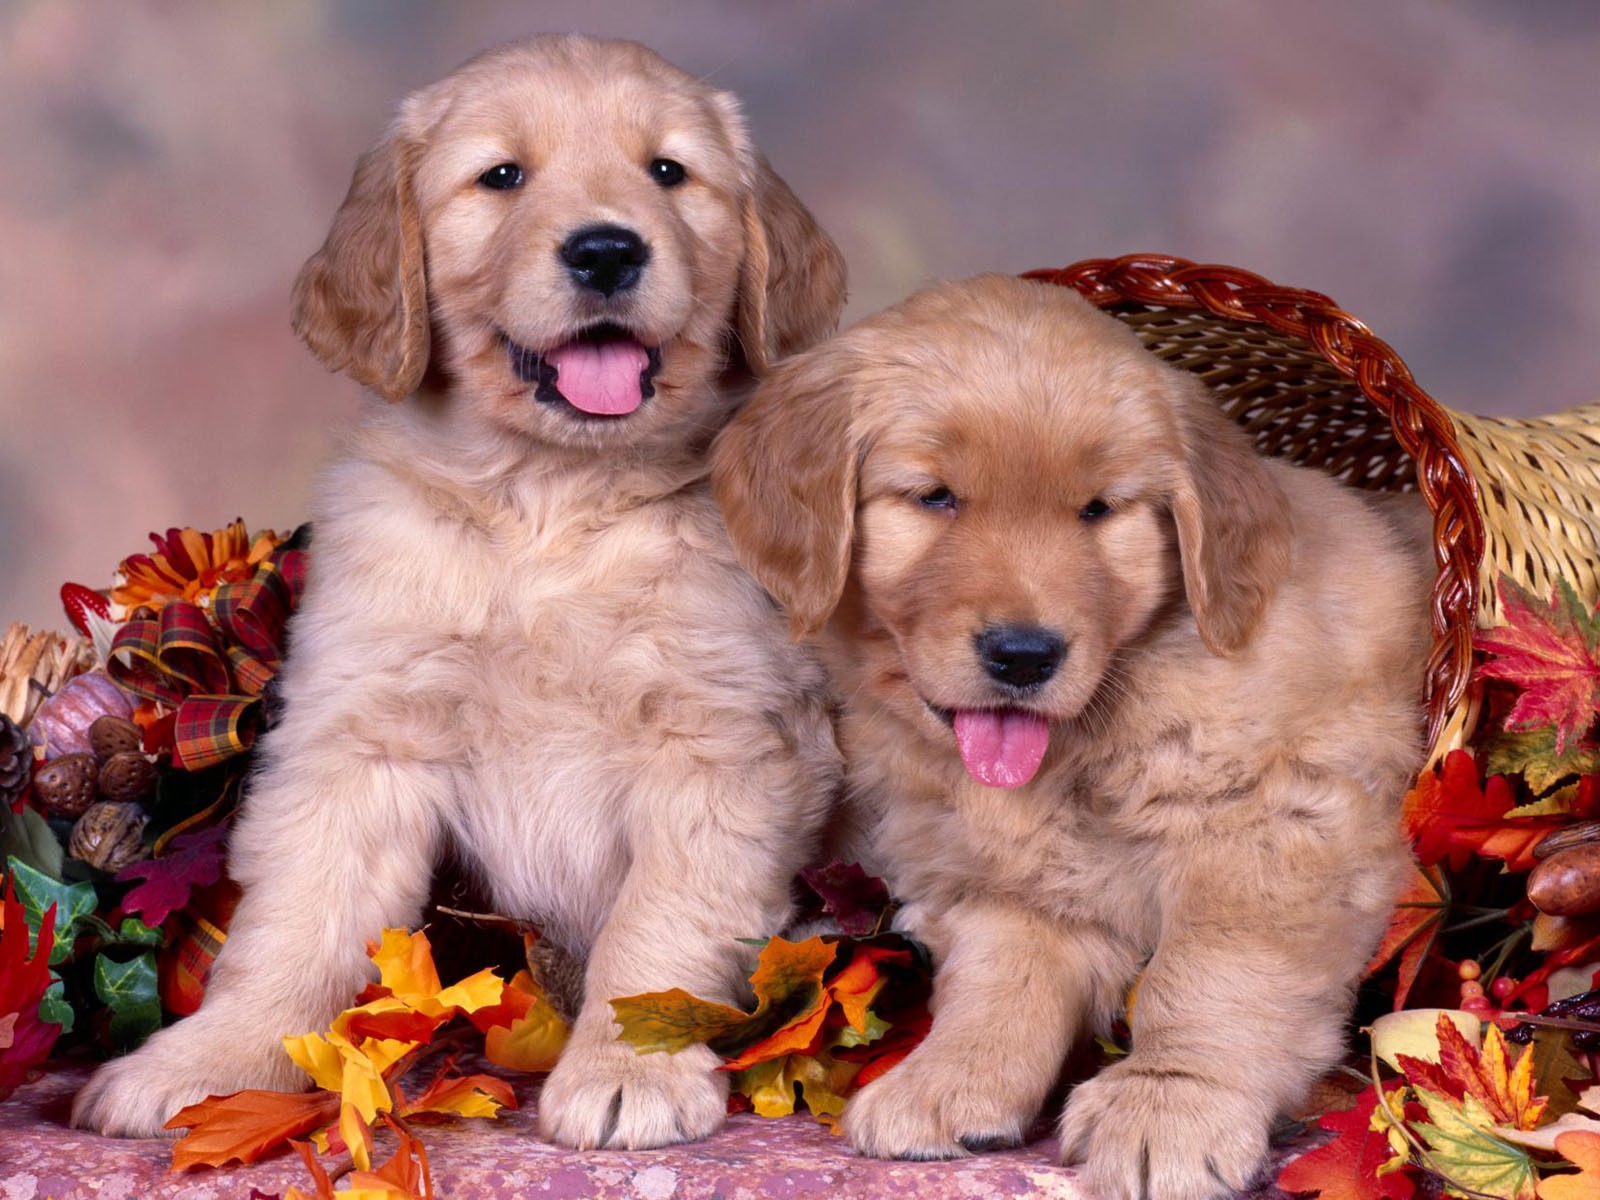 Puppy Photo HD wallpapers (2) #12 - 1600x1200